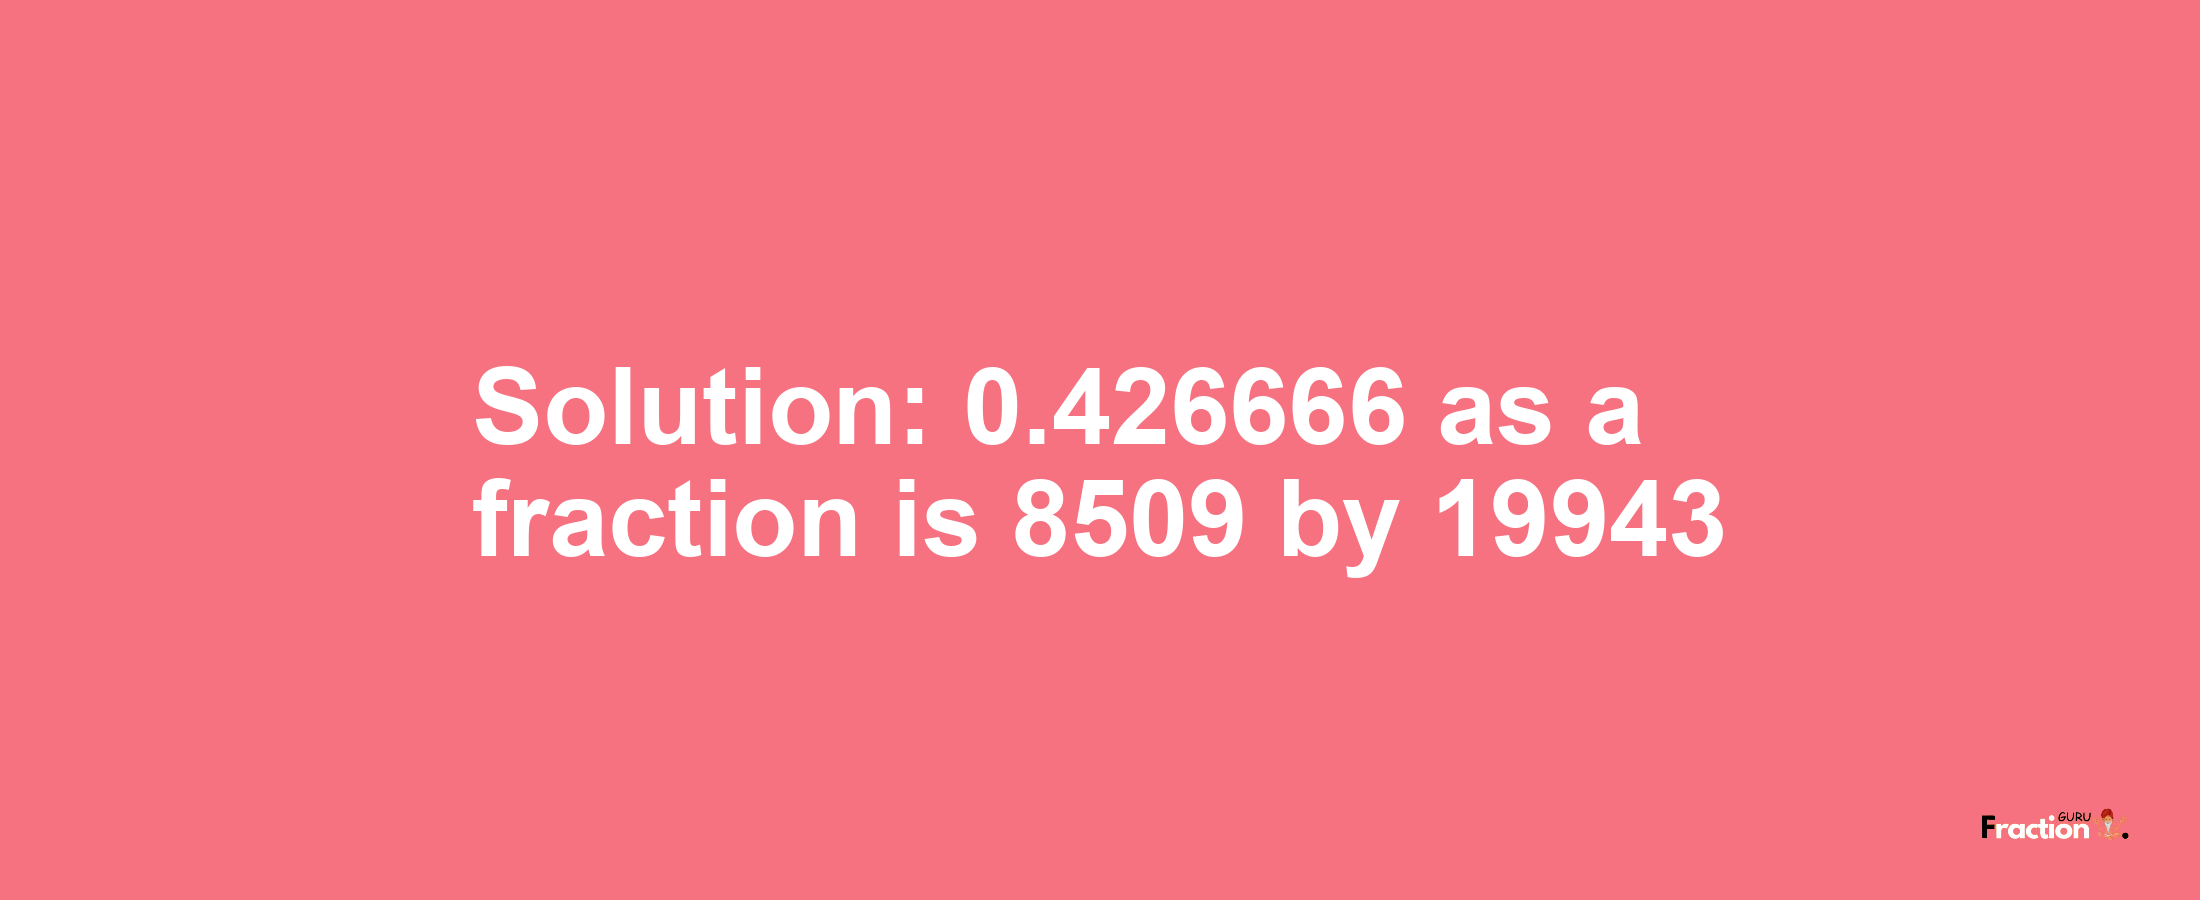 Solution:0.426666 as a fraction is 8509/19943